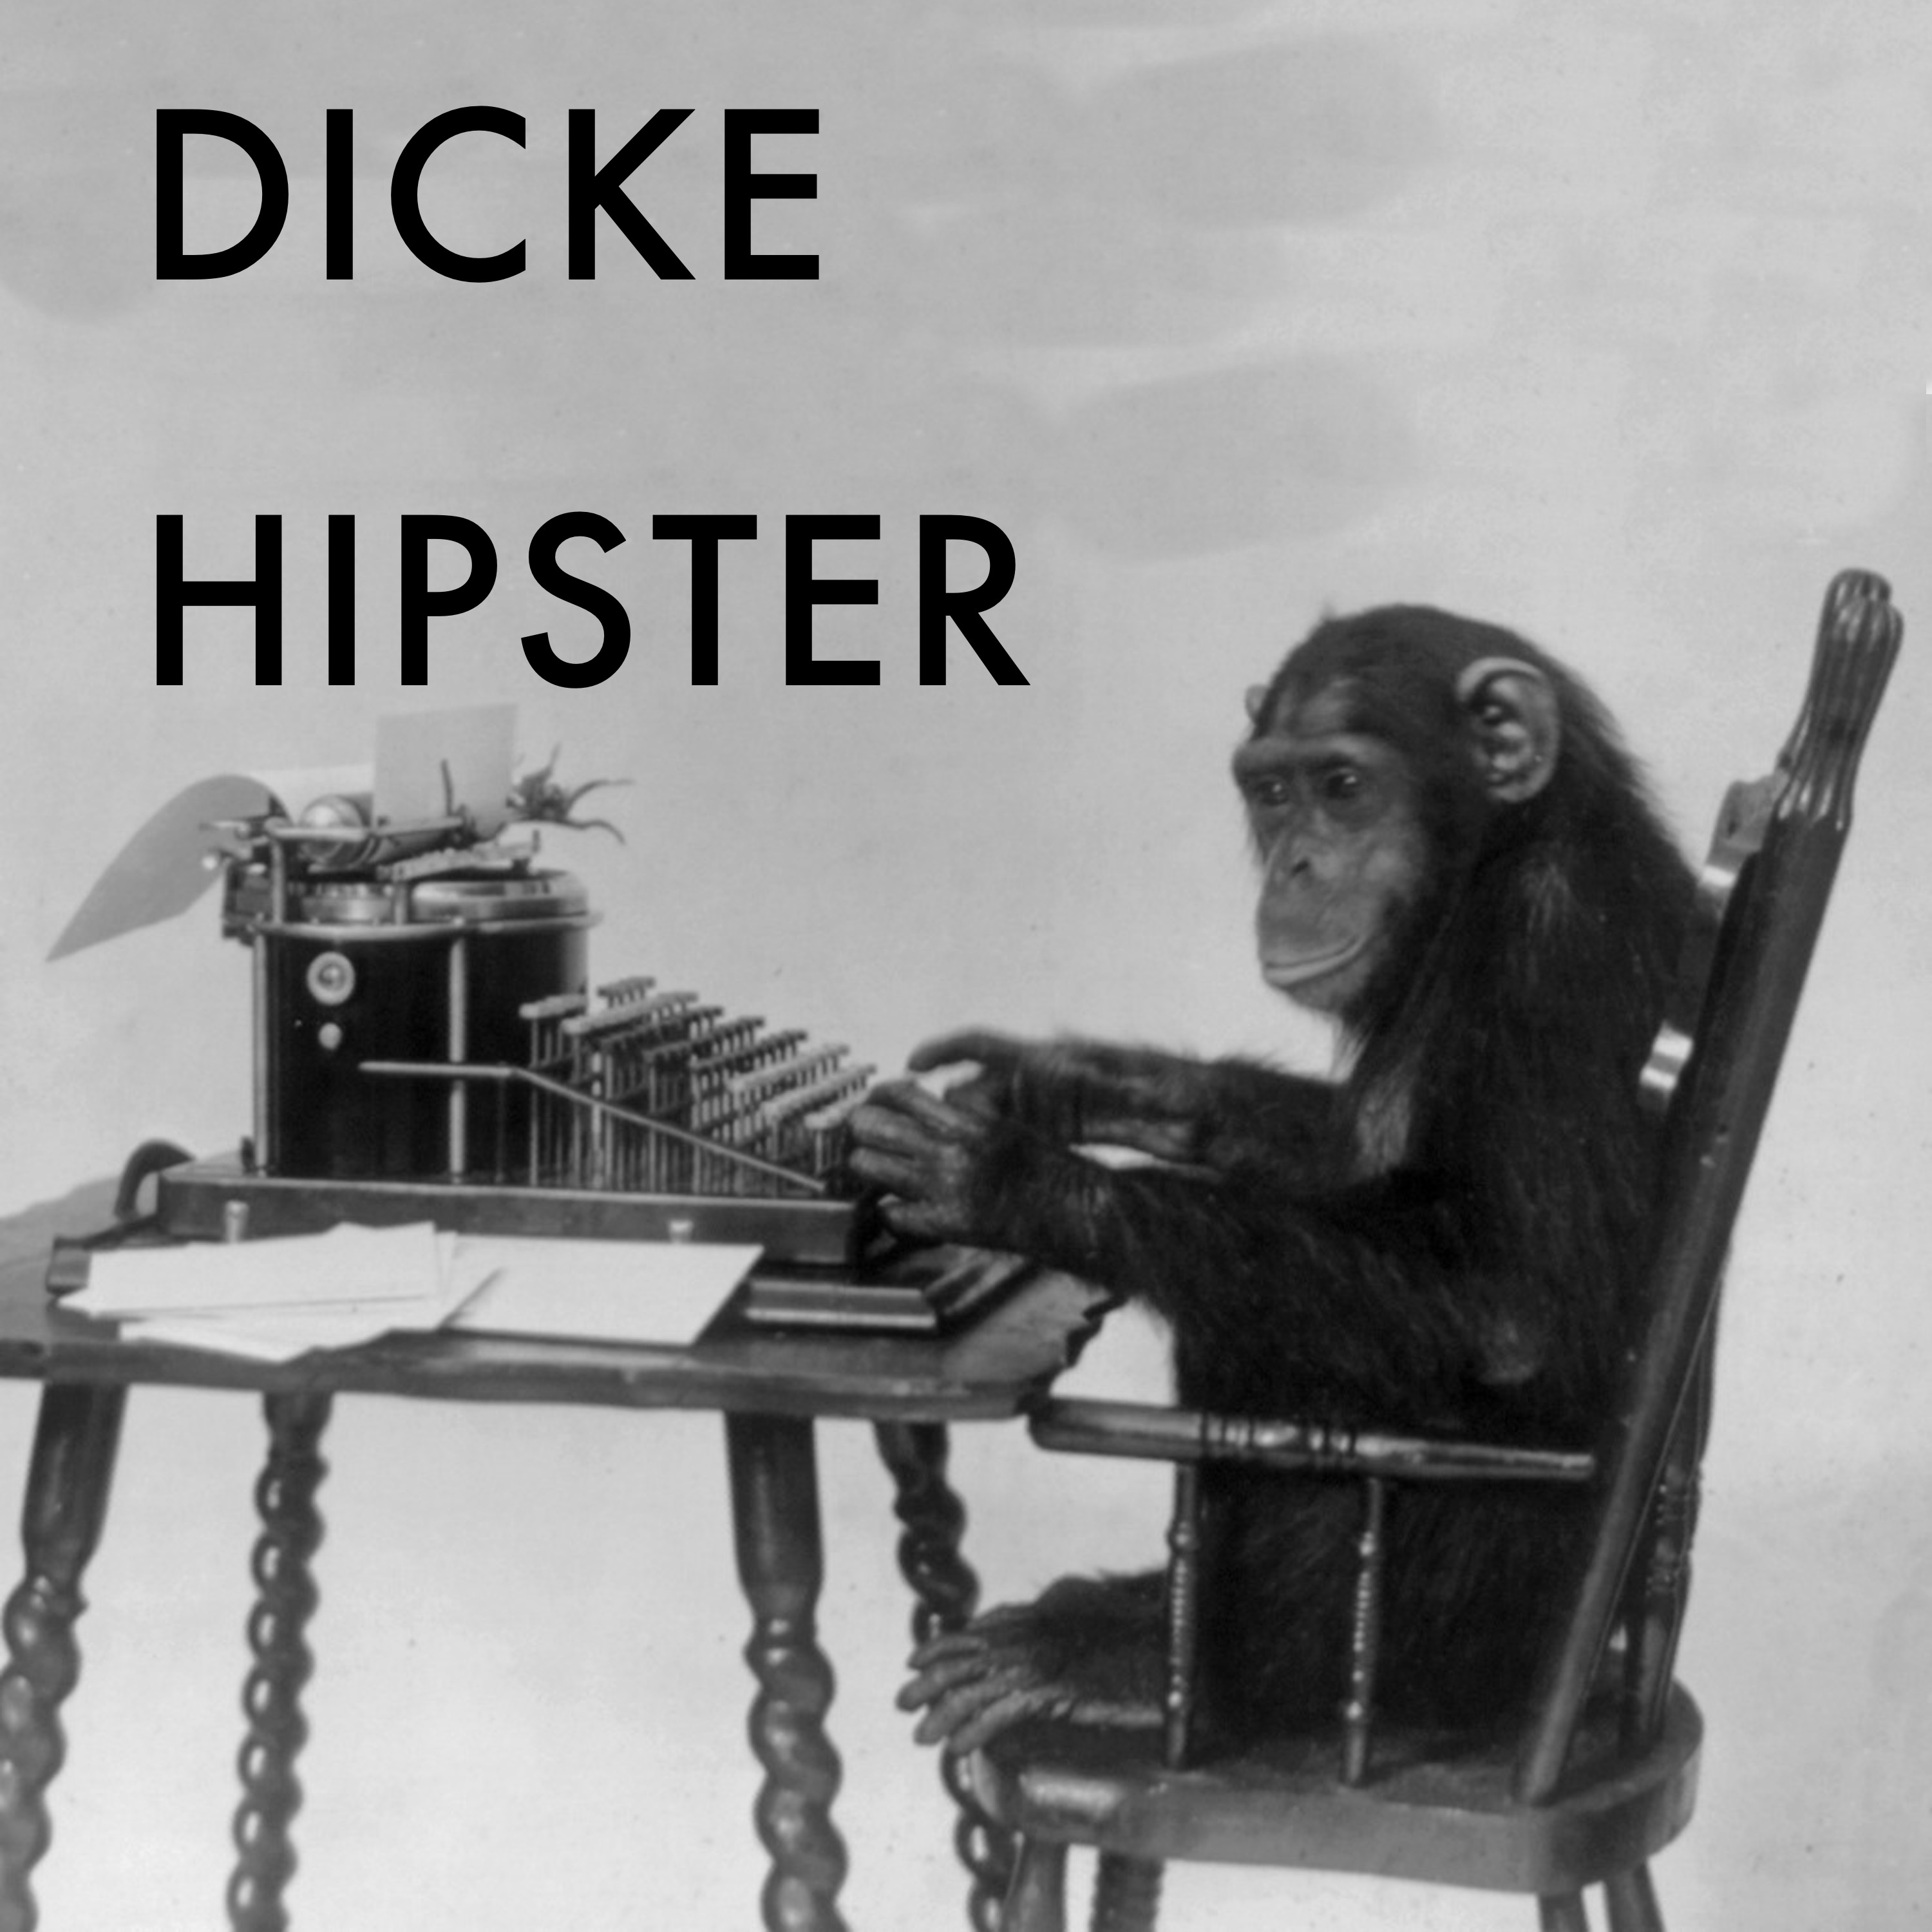 Dicke Hipster